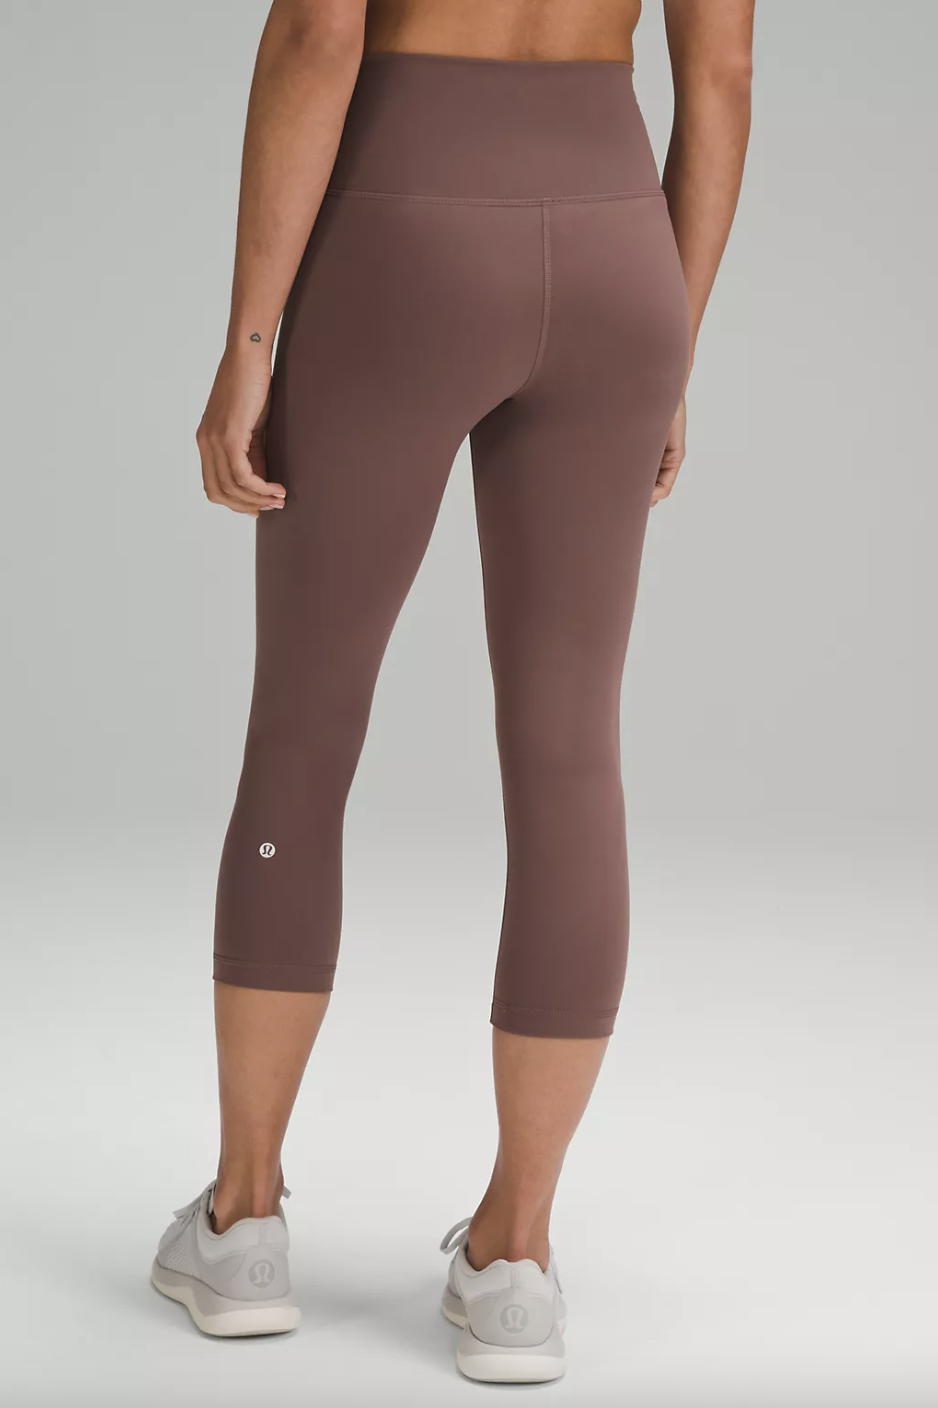 These Gym Leggings Give A Great Bum Lift And Are Super Cheap